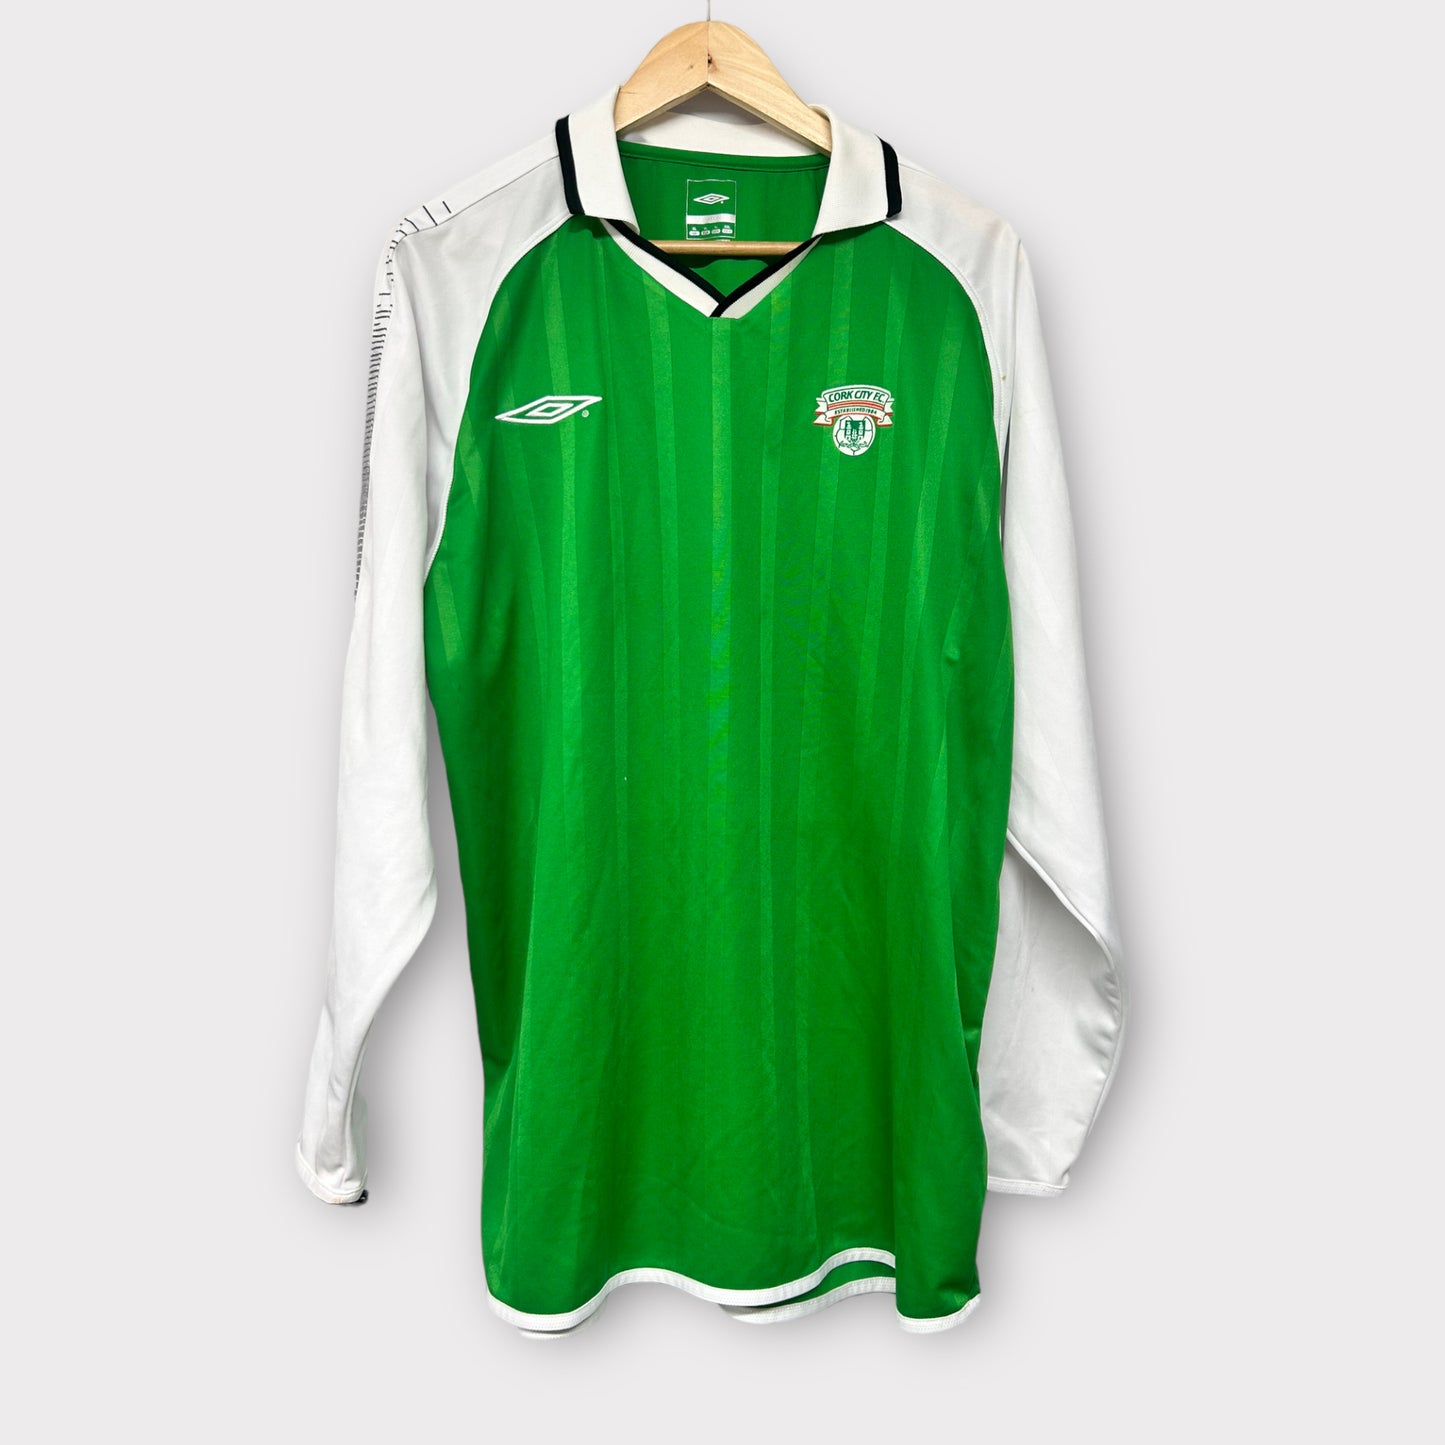 Cork City FC 2006 FAI Youth Cup Player issued shirt - #13